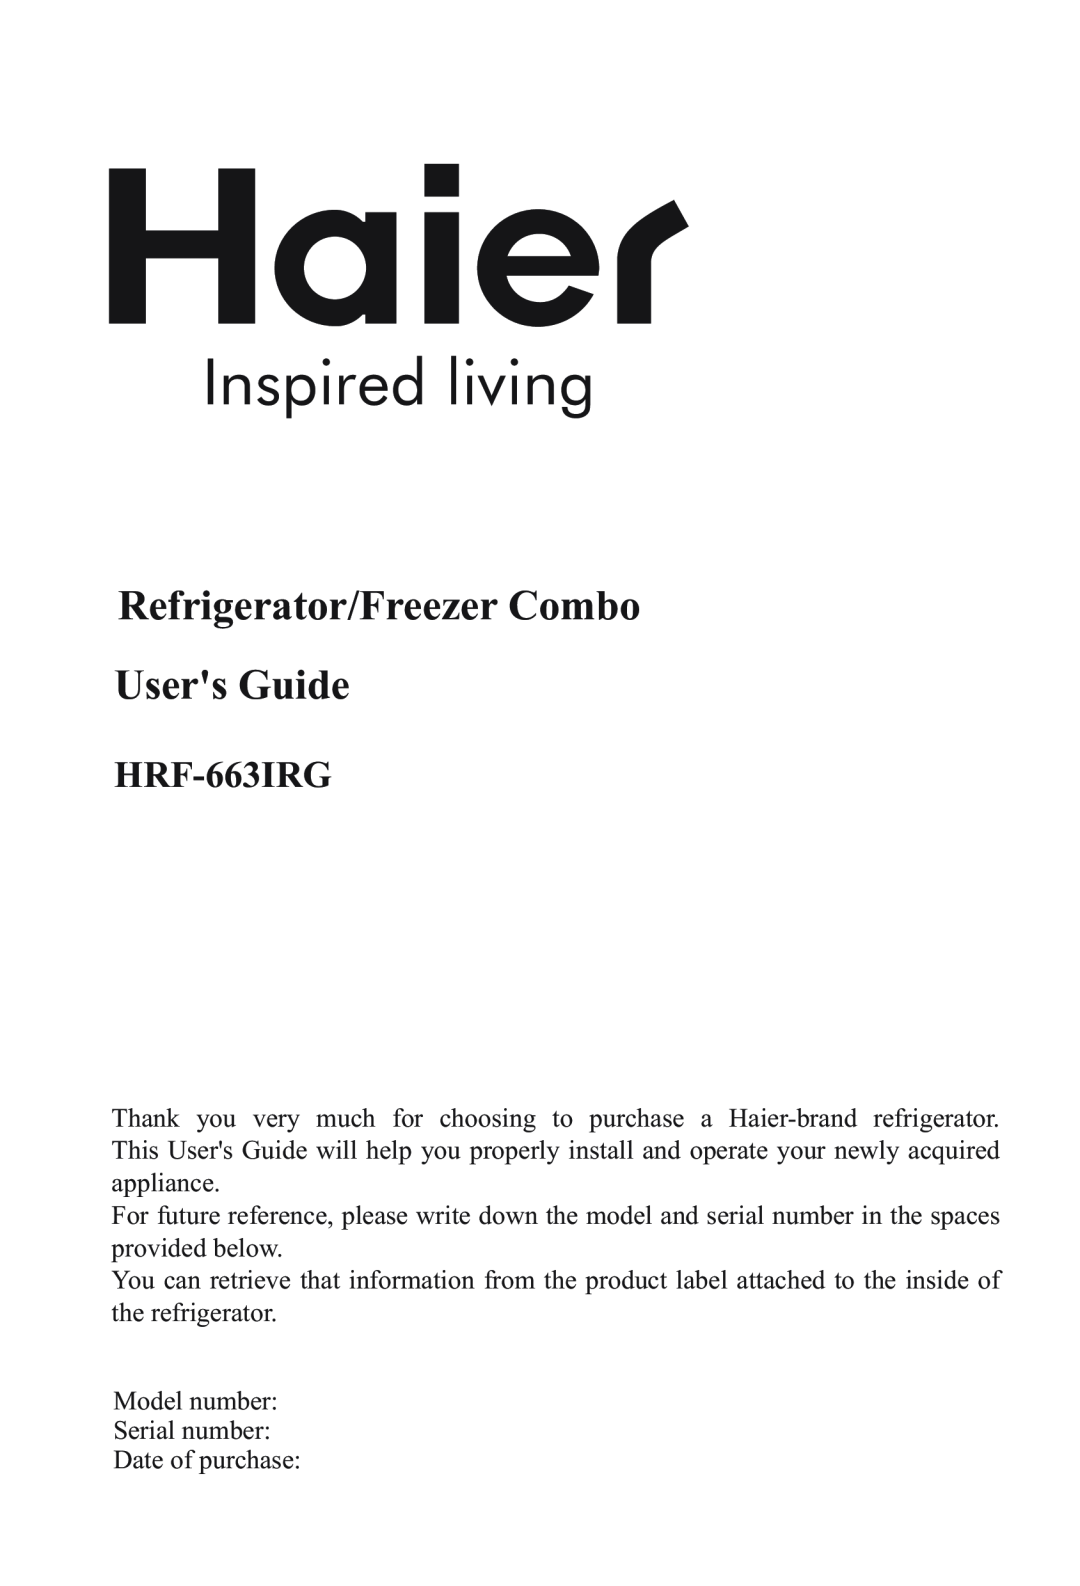 Haier HRF-663IRG manual Refrigerator/Freezer Combo Users Guide, Inspired living 